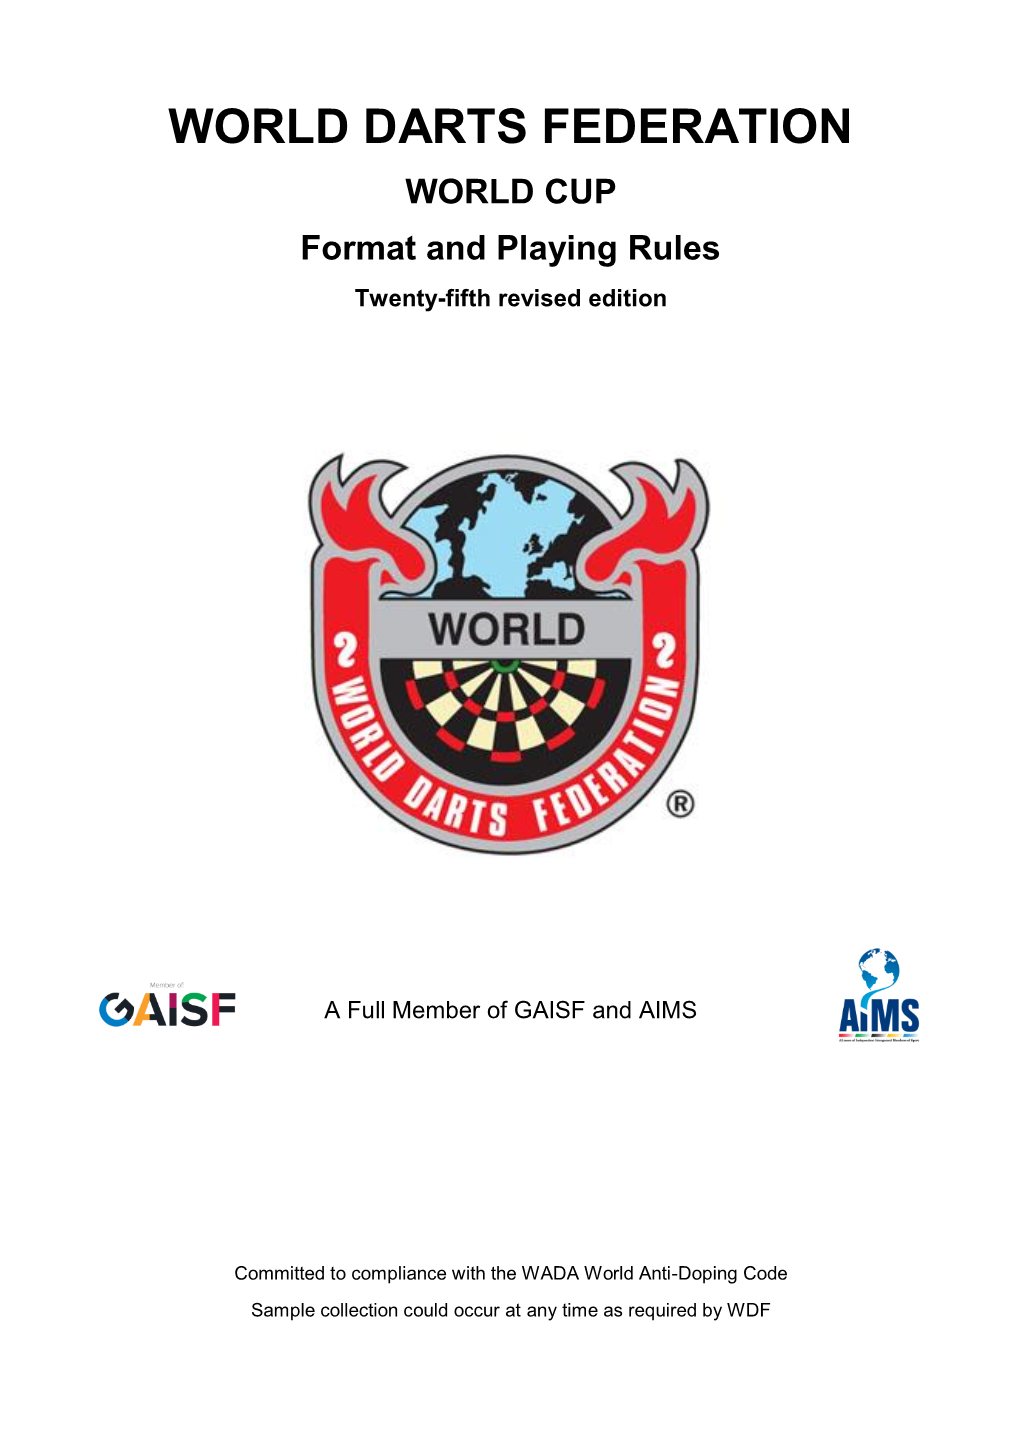 WDF World Cup Rules at Any Time to Meet Any Purposes Deemed to Be Necessary by the WDF Executive